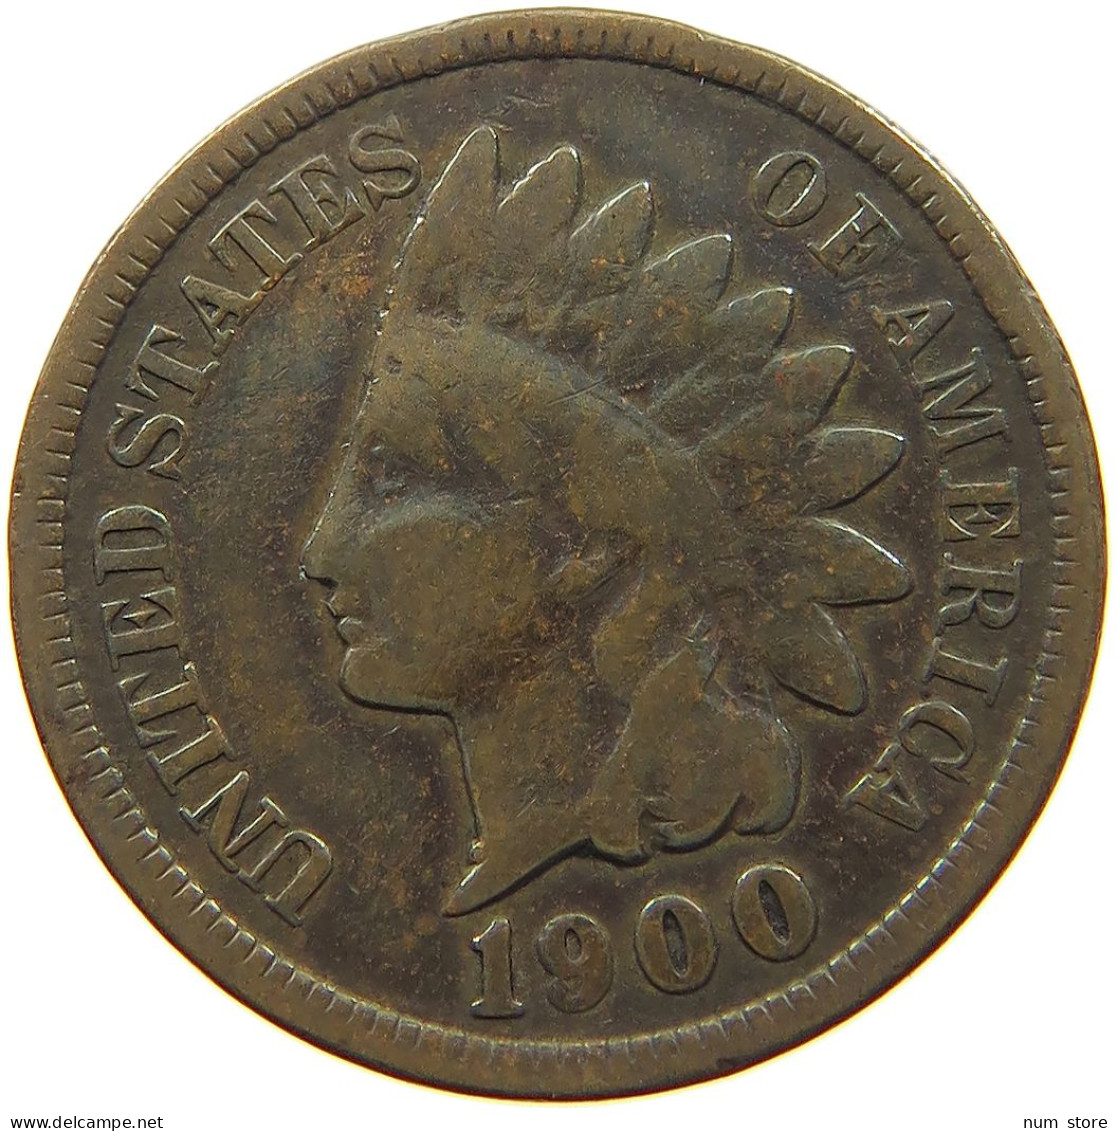 UNITED STATES OF AMERICA CENT 1900 INDIAN HEAD #c082 0273 - 1859-1909: Indian Head